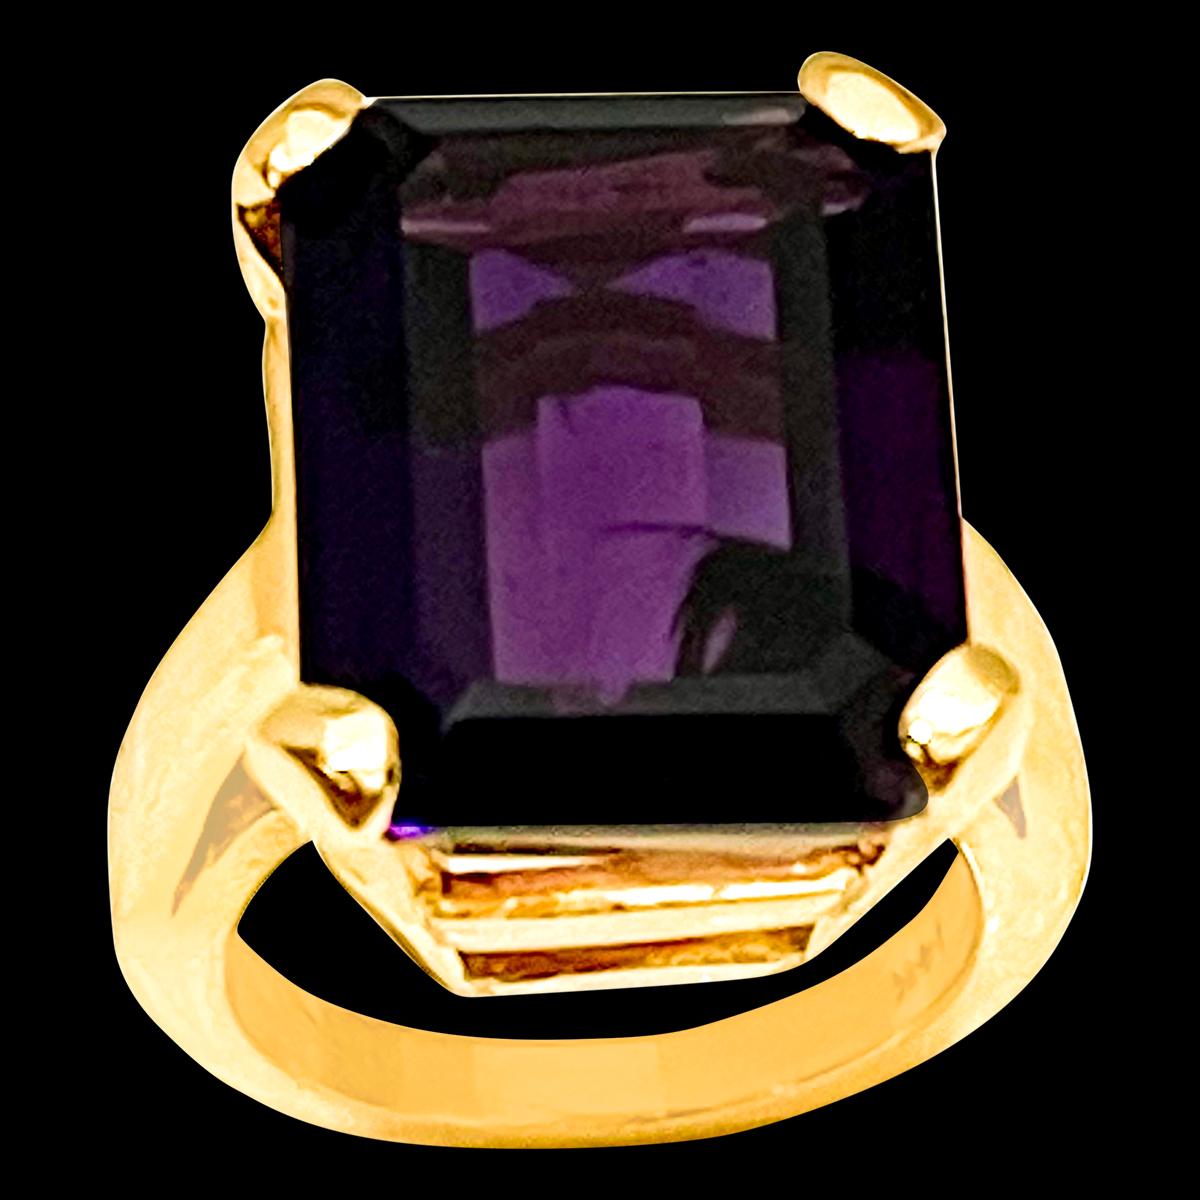 Approximately 15 Carat Emerald Cut Amethyst  Cocktail Ring in 14 Karat Yellow Gold Size 6
18 x 13 MM Amethyst  Cocktail Ring in 14 Karat Yellow Gold 

This is a Beautiful Cocktail ring ring which has a large approximately 15 carat of  Amethyst .